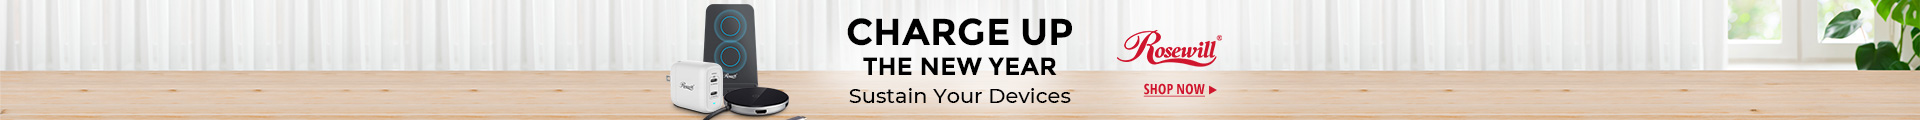 Charge Up the New Year